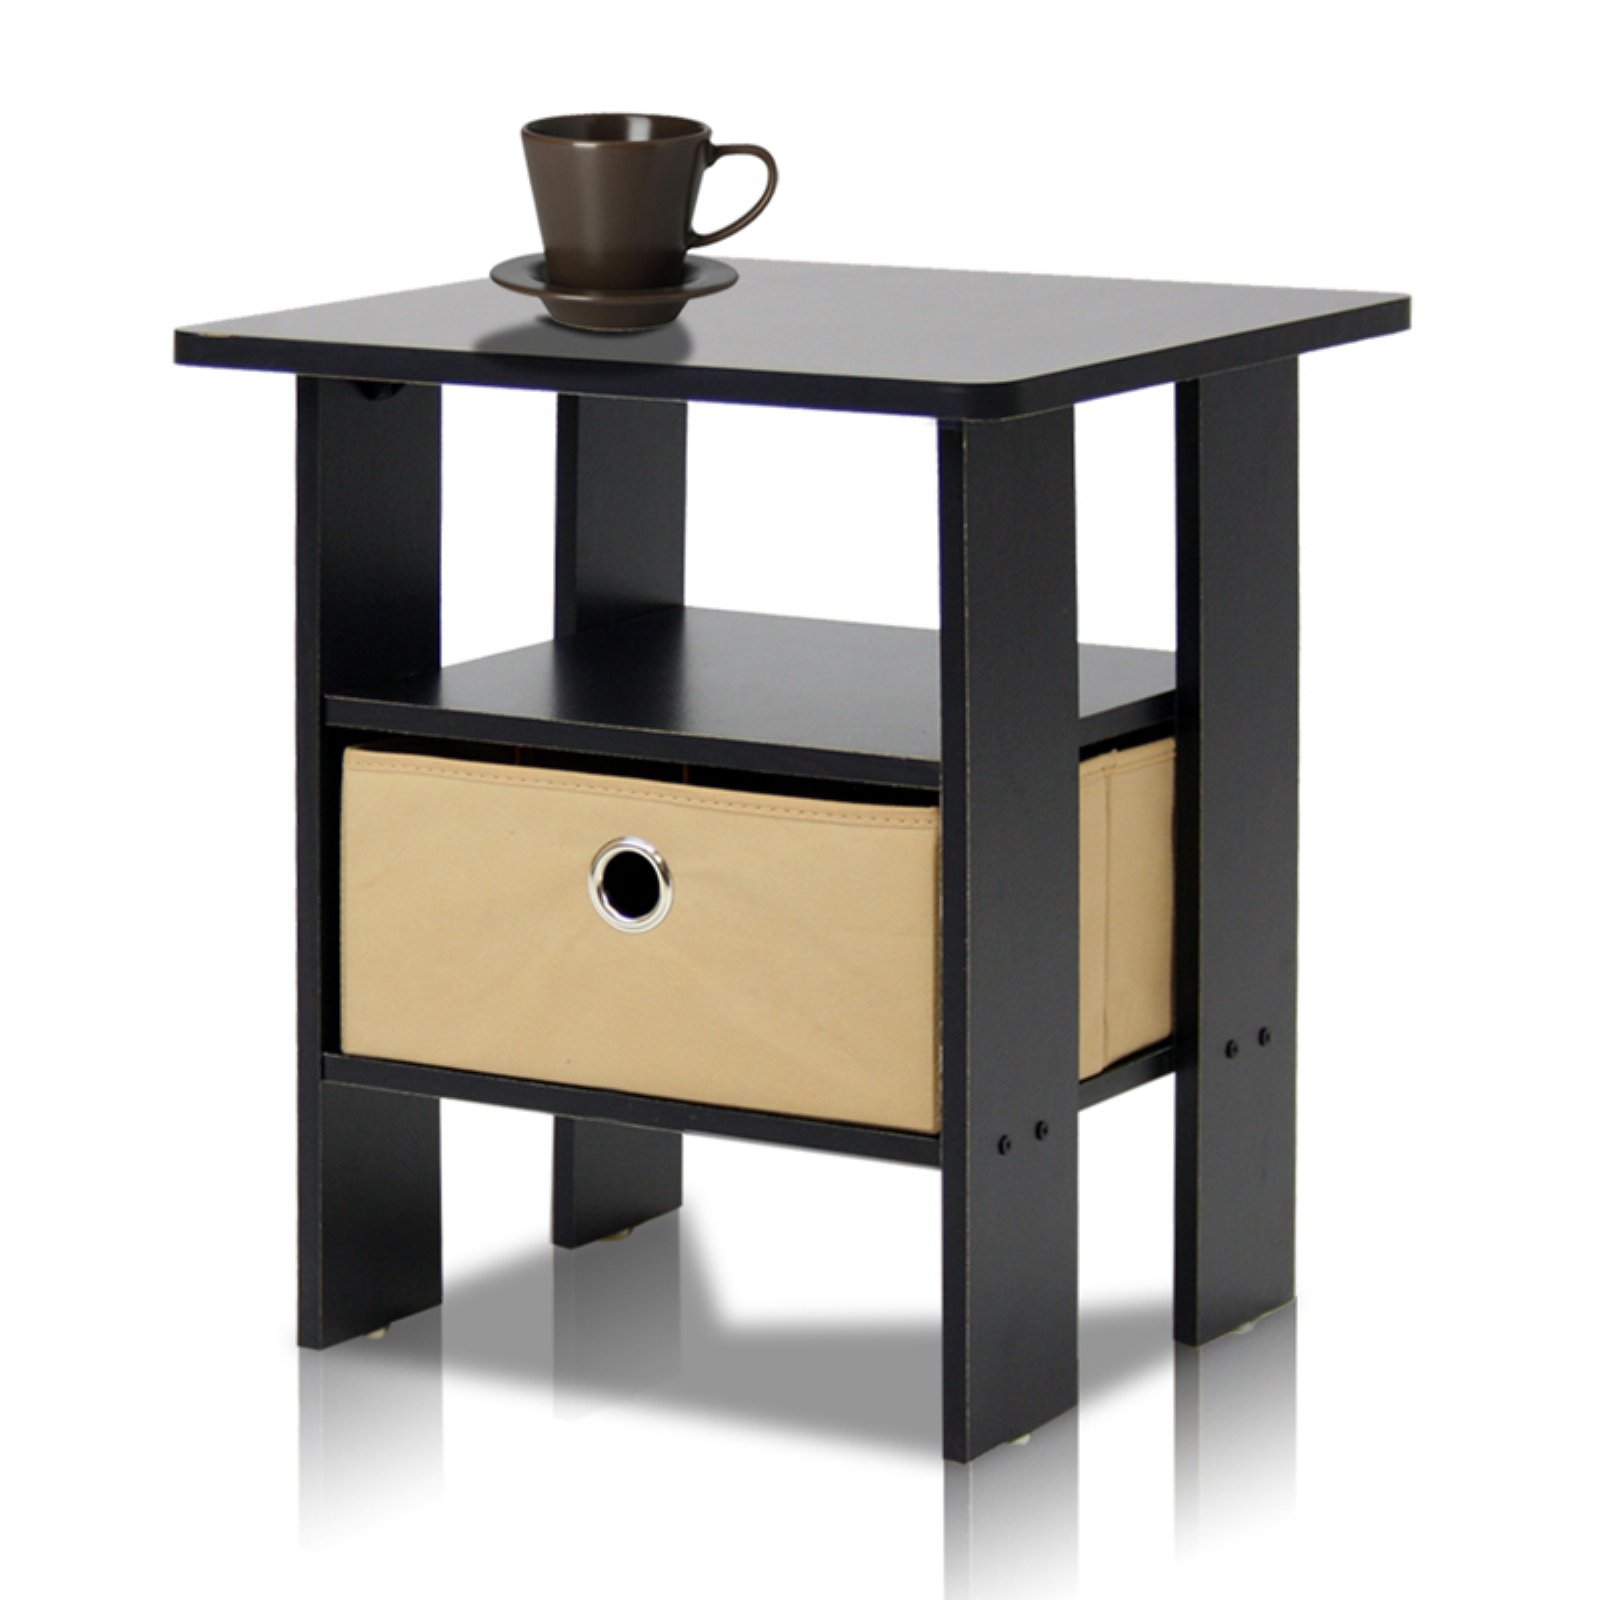 Furinno Andrey Engineered Wood End Table with Bin Drawer in Steam Beech/Natural - image 4 of 7